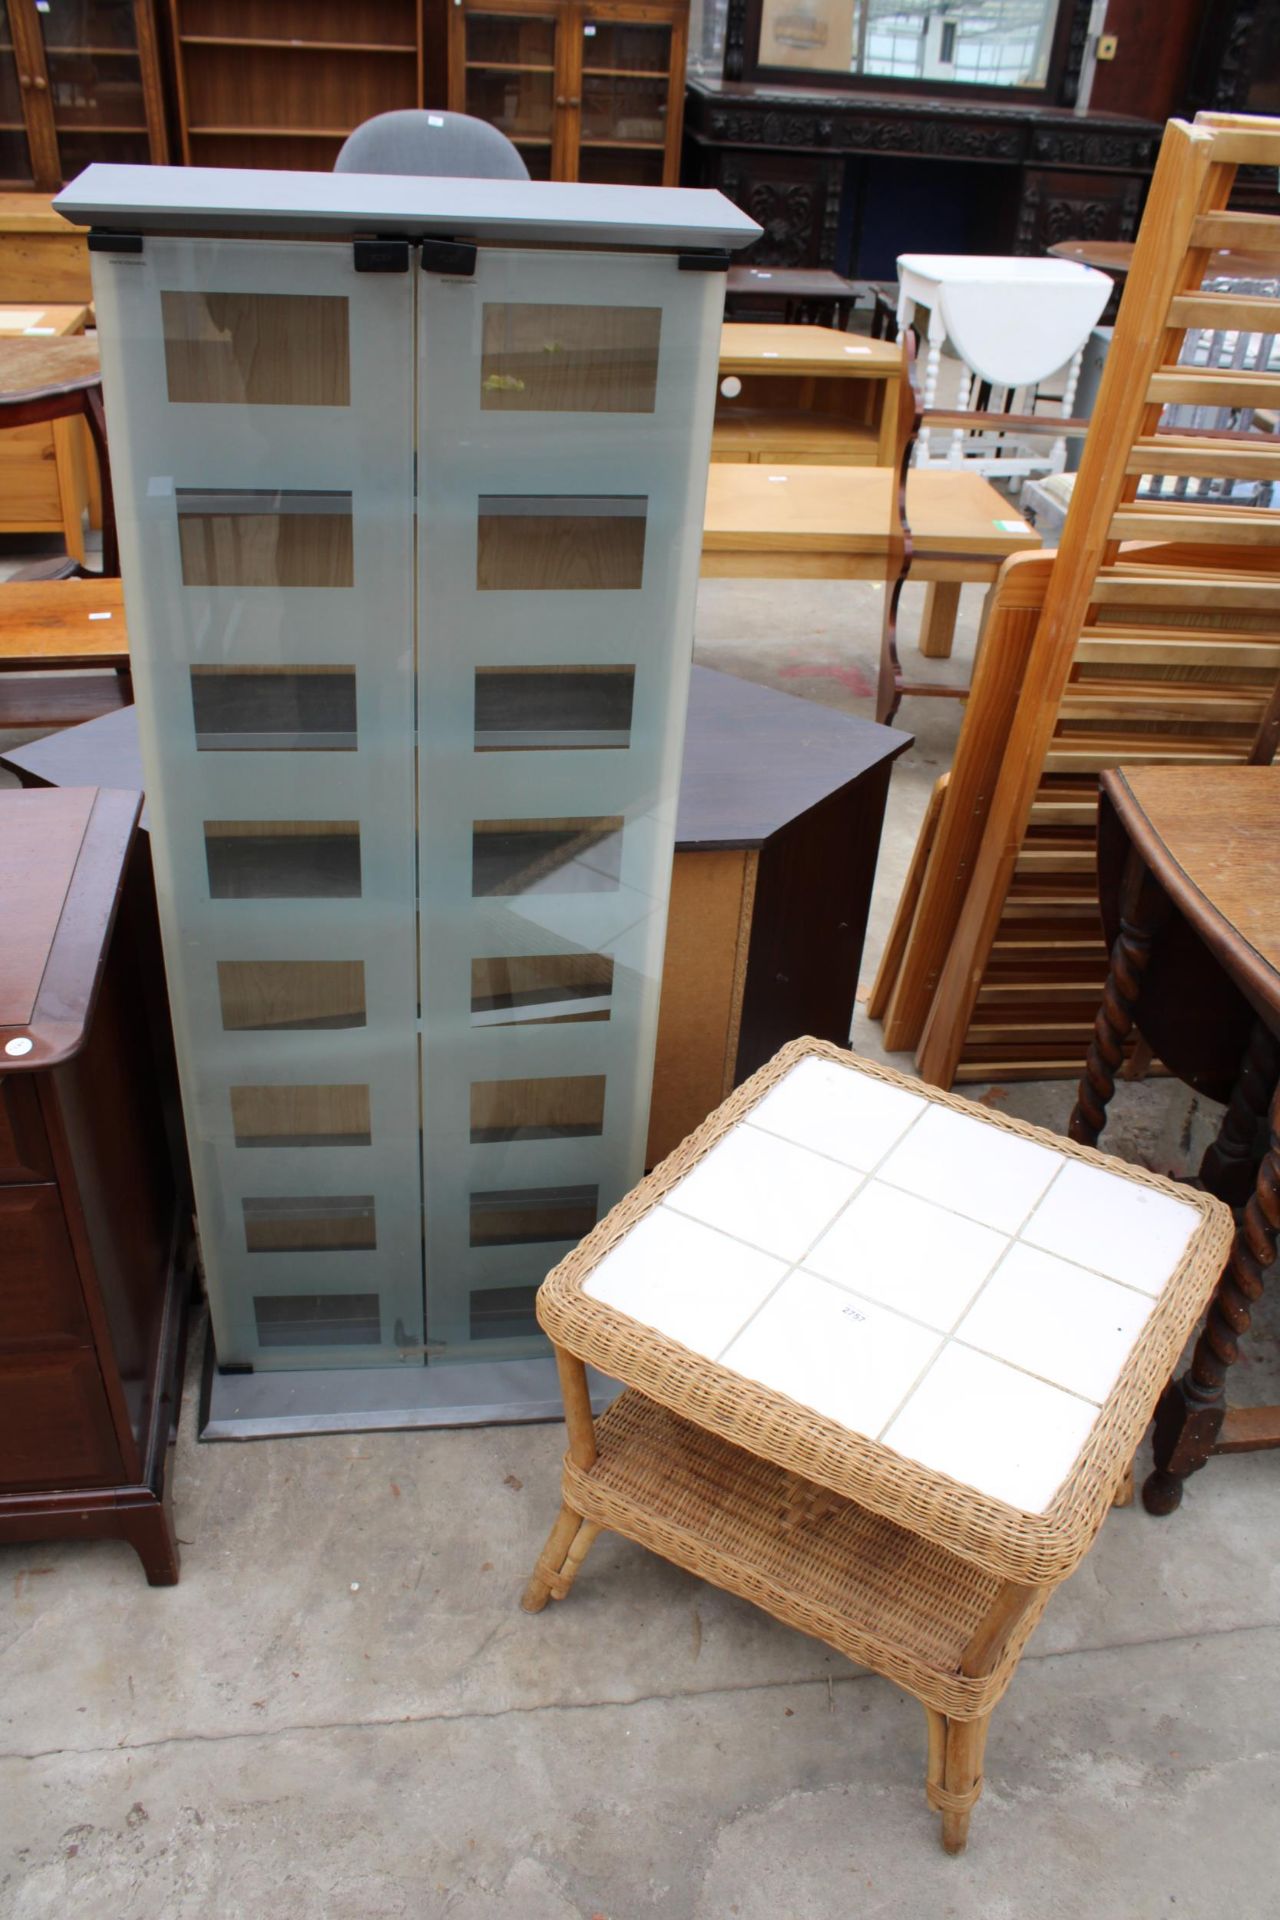 A TWO TIER WICKER LAMP TABLE WITH TILED TOP AND A GLASS FRONTED TWO DOOR BOOKCASE - Image 3 of 6